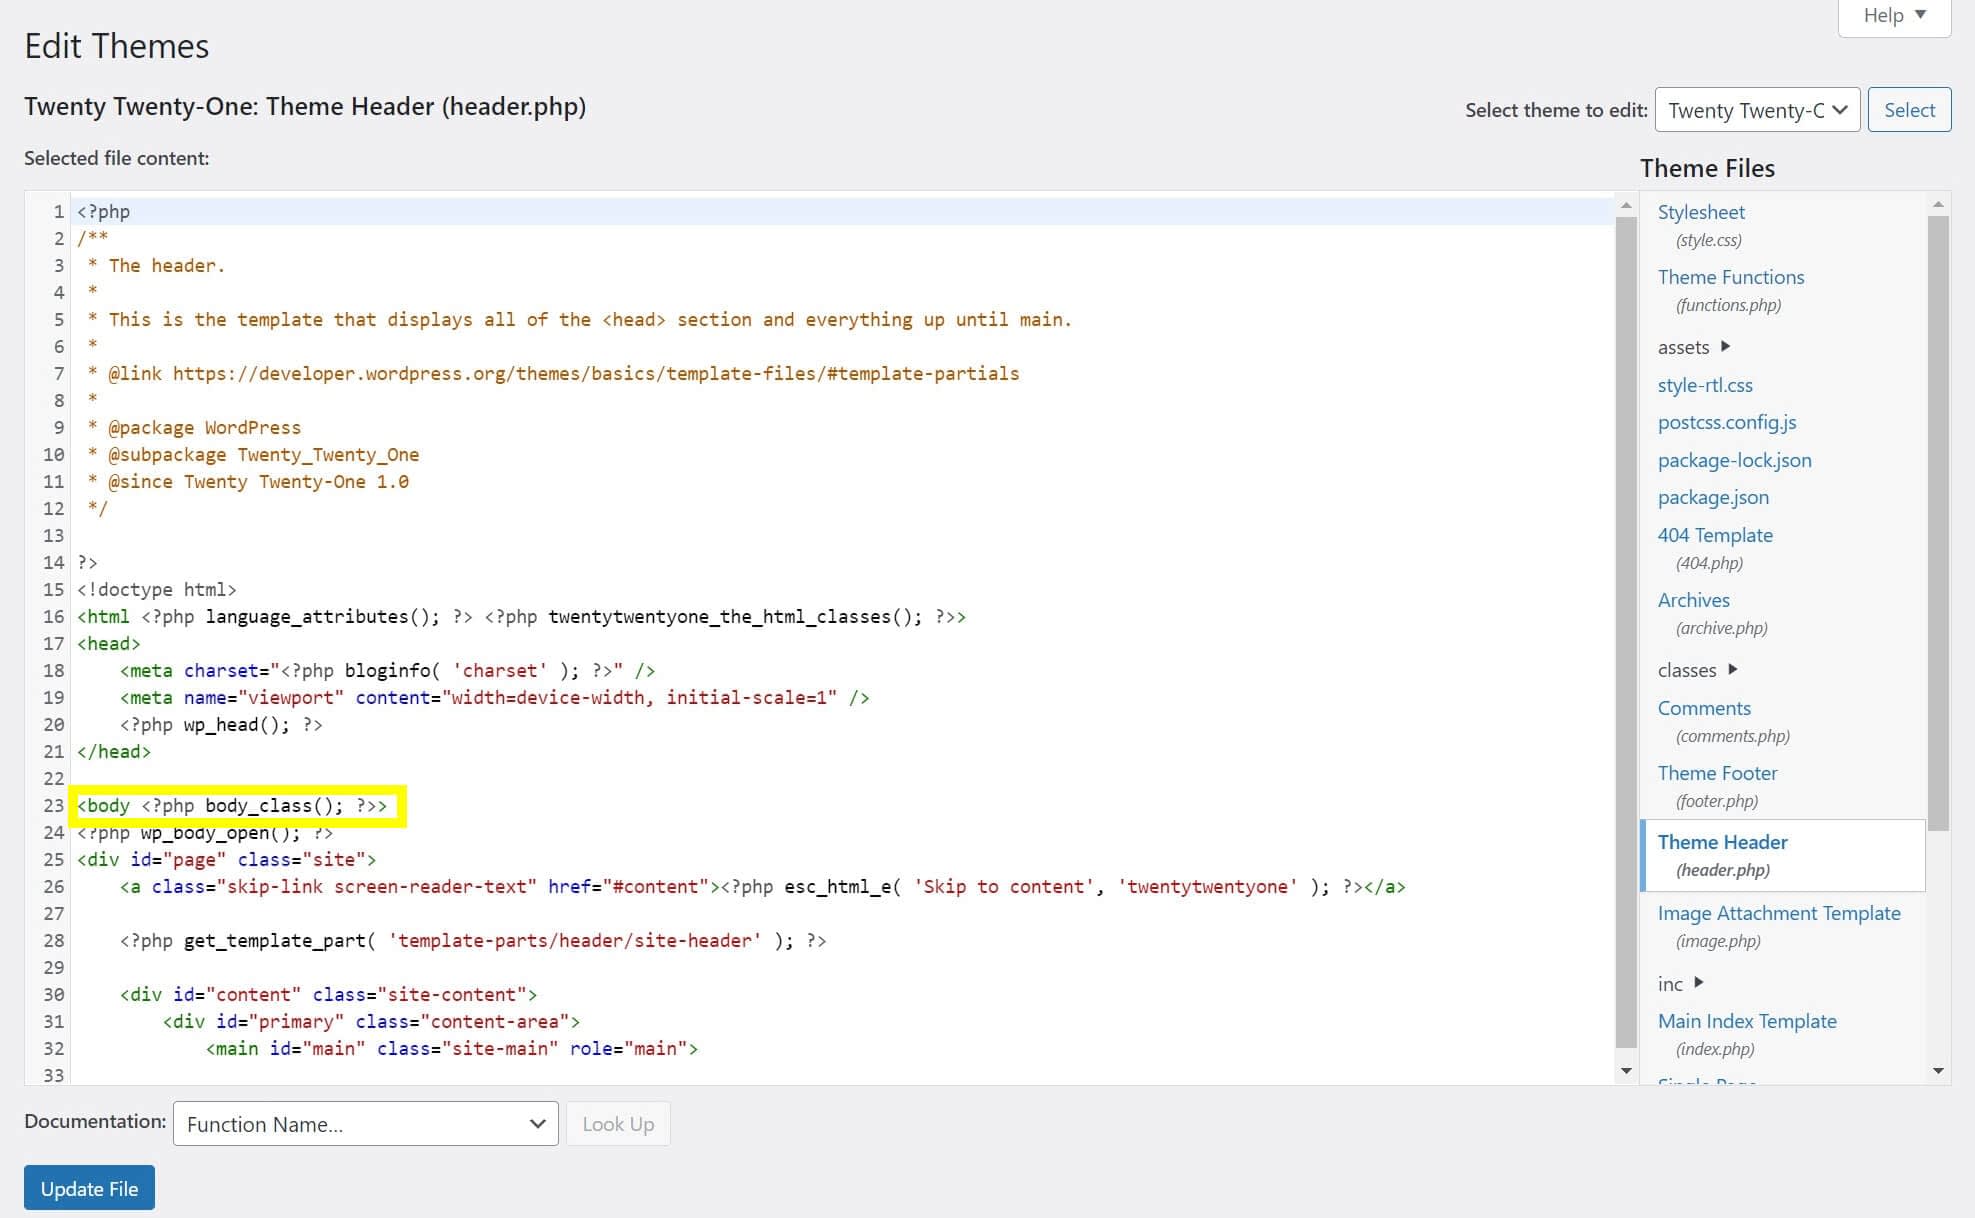 The header.php file in the WordPress Theme Editor.